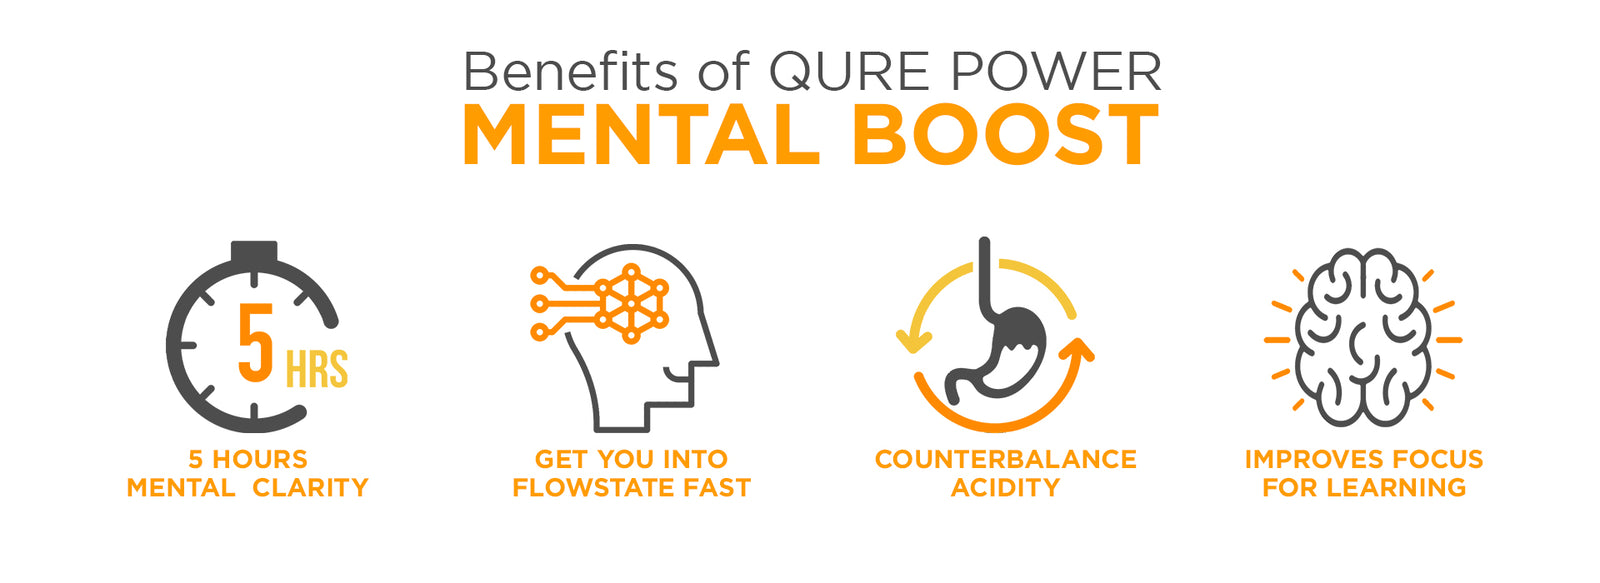 BENEFITS OF QURE POWER MENTAL BOOST